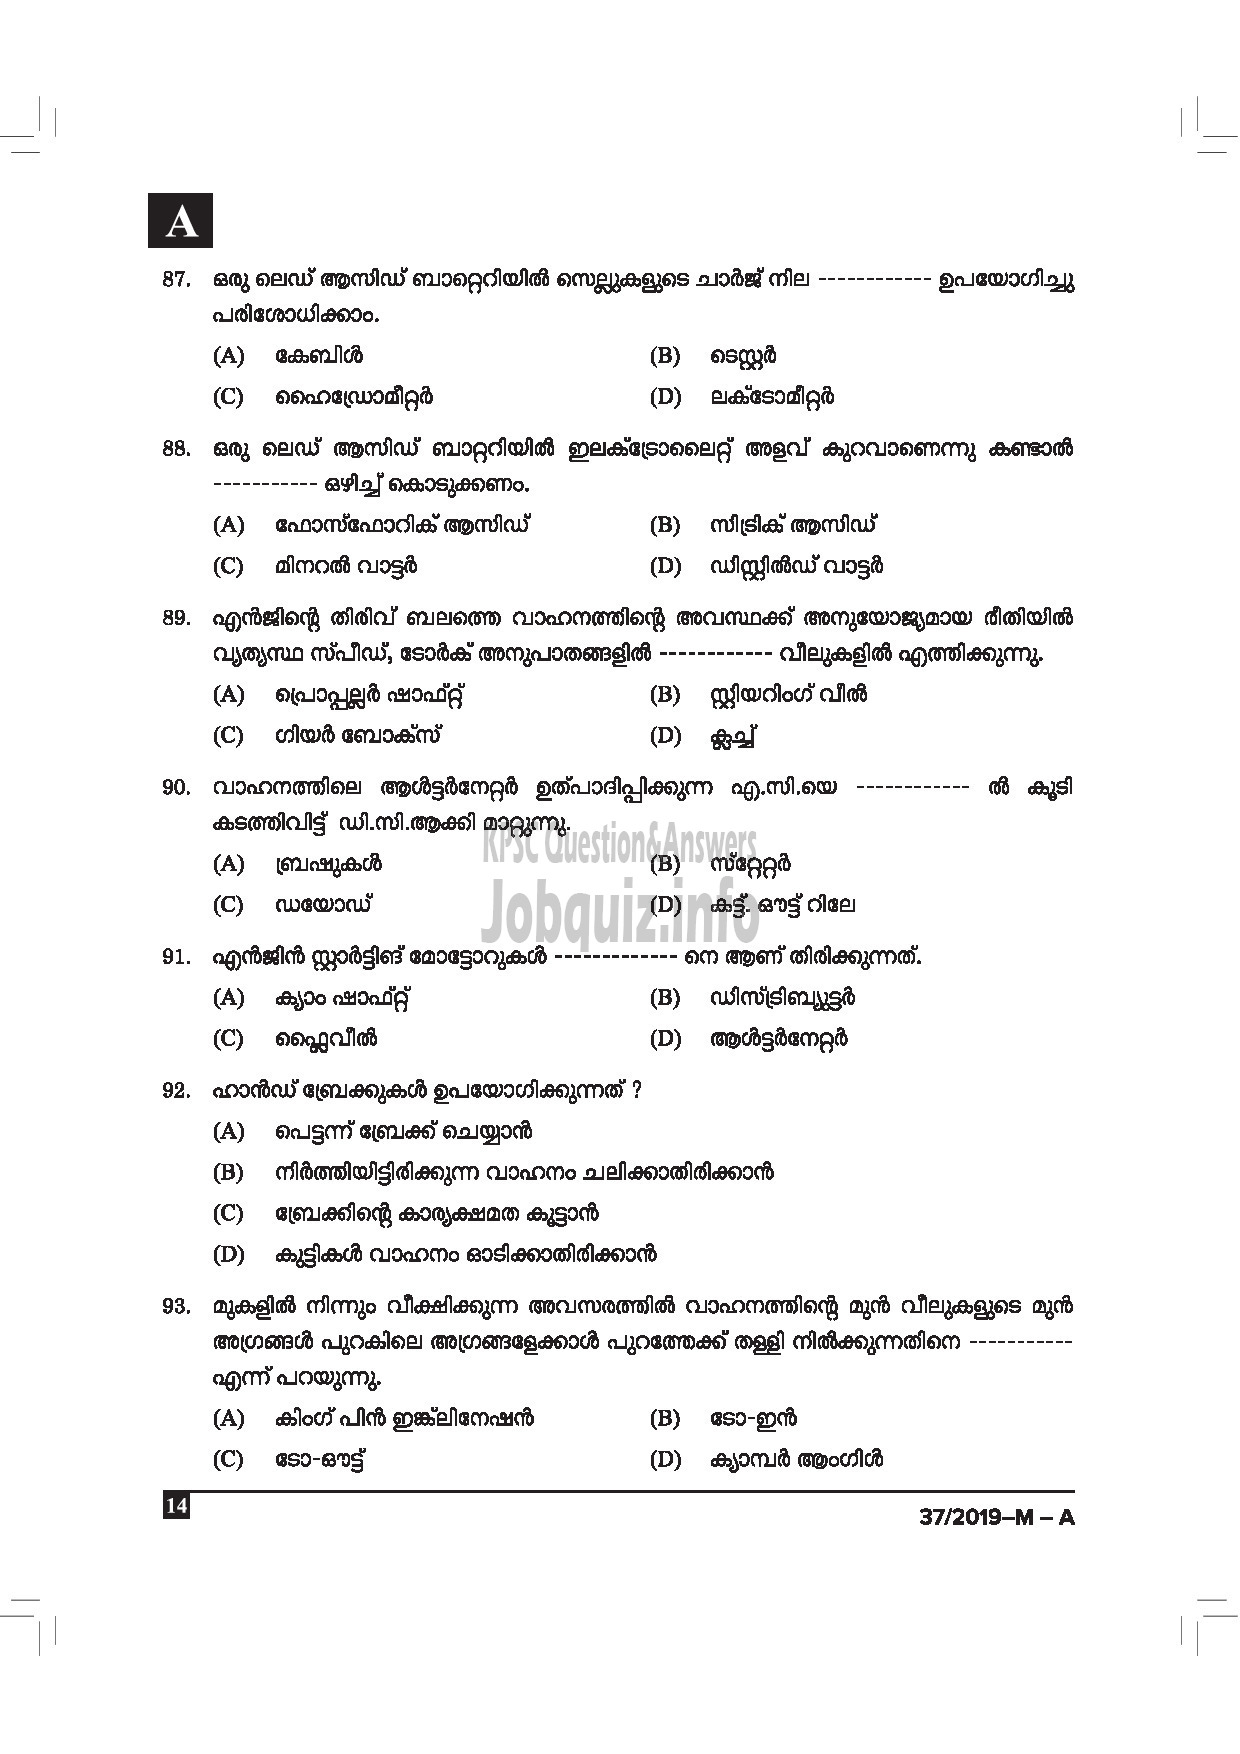 Kerala PSC Question Paper - DRIVER CUM OFFICE ATTENDANT / POLICE CONSTABLE DRIVER GOVT OWNED COMP / CORP / BOARD / POLICE MALAYALAM -14